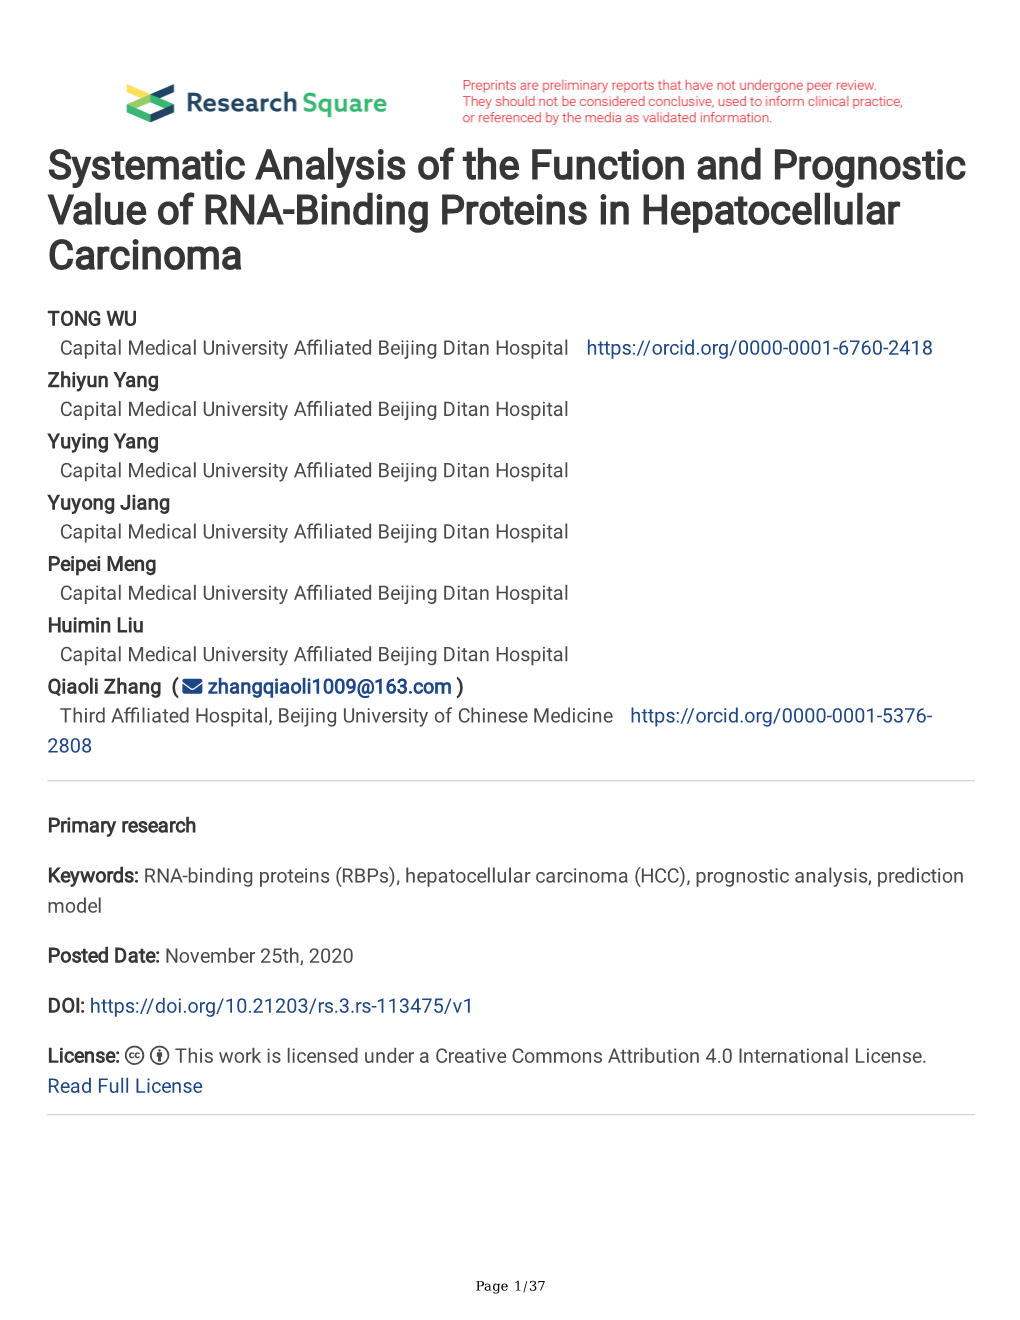 Systematic Analysis of the Function and Prognostic Value of RNA-Binding Proteins in Hepatocellular Carcinoma